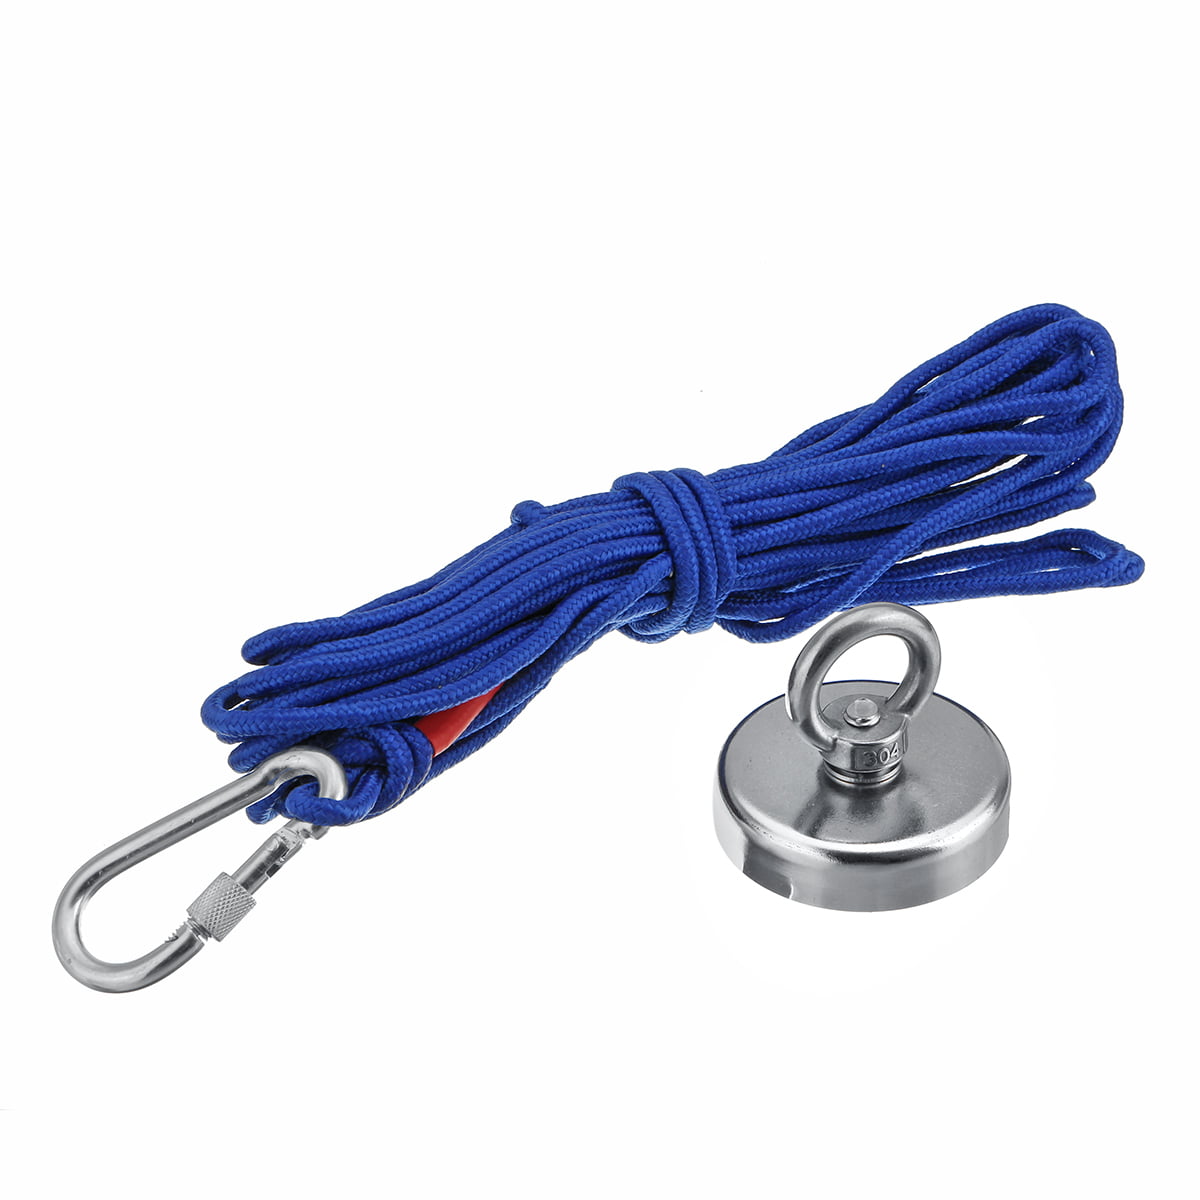 UPTO 2000LB Fishing Magnet Kit Strong Neodymium Pull Force with Rope & Carabiner 